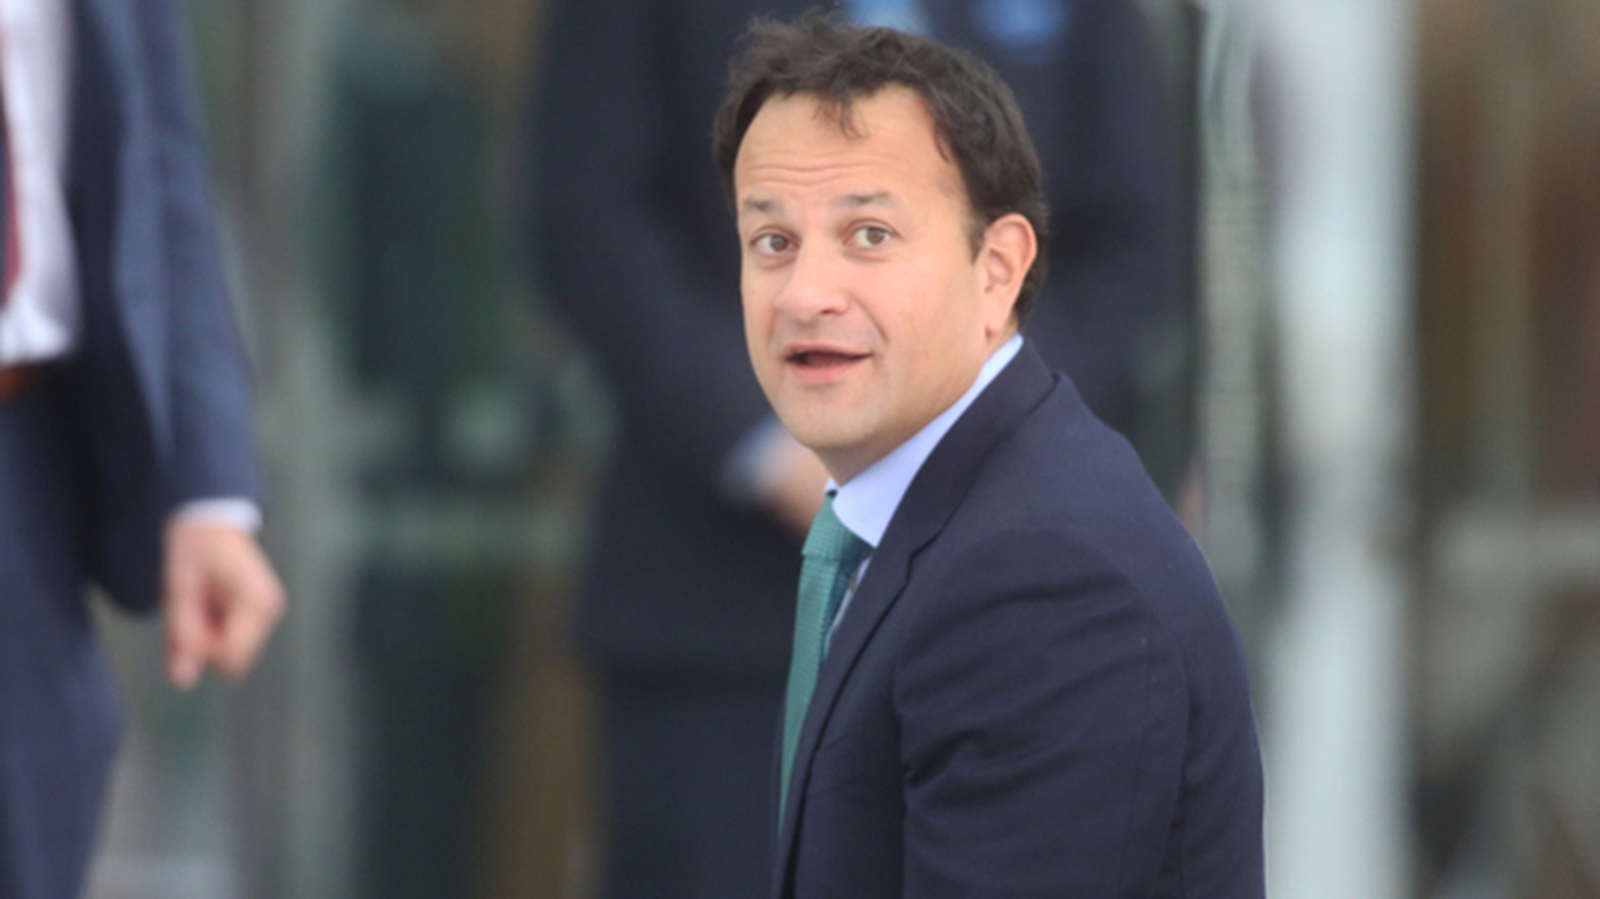 Public to Varadkar: Stand up to Greens, don't be smug